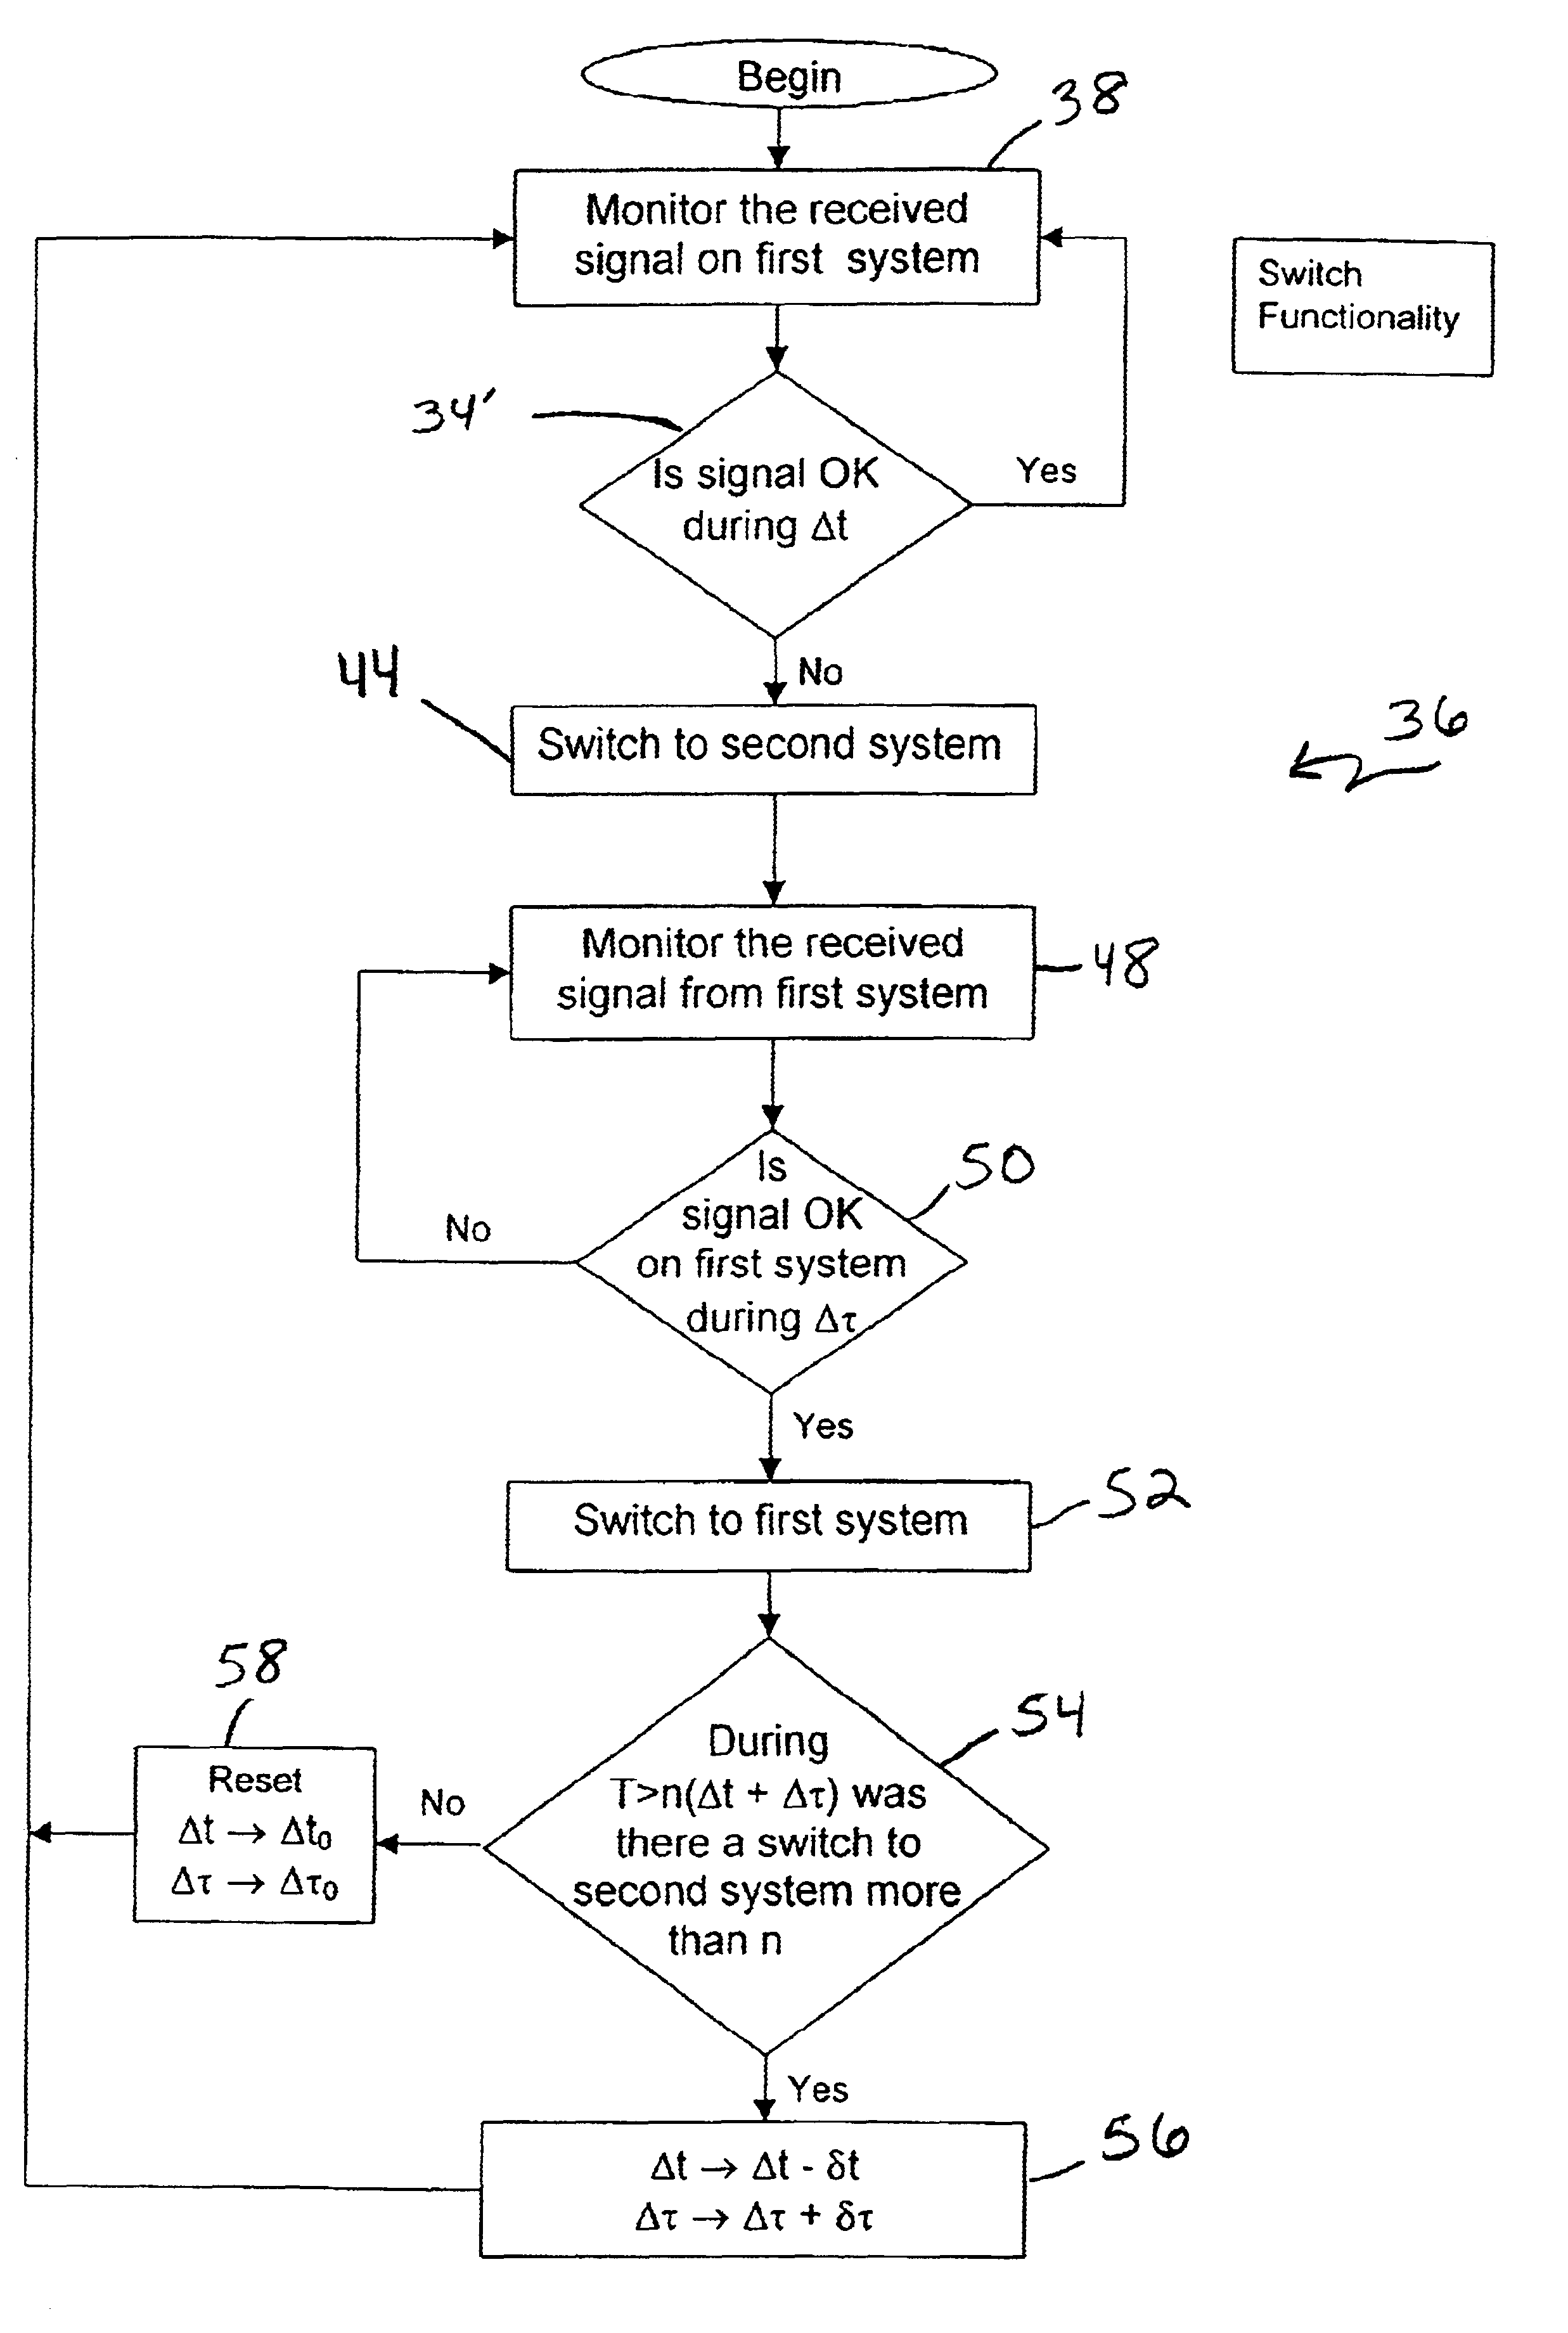 Optical communications system with back-up link